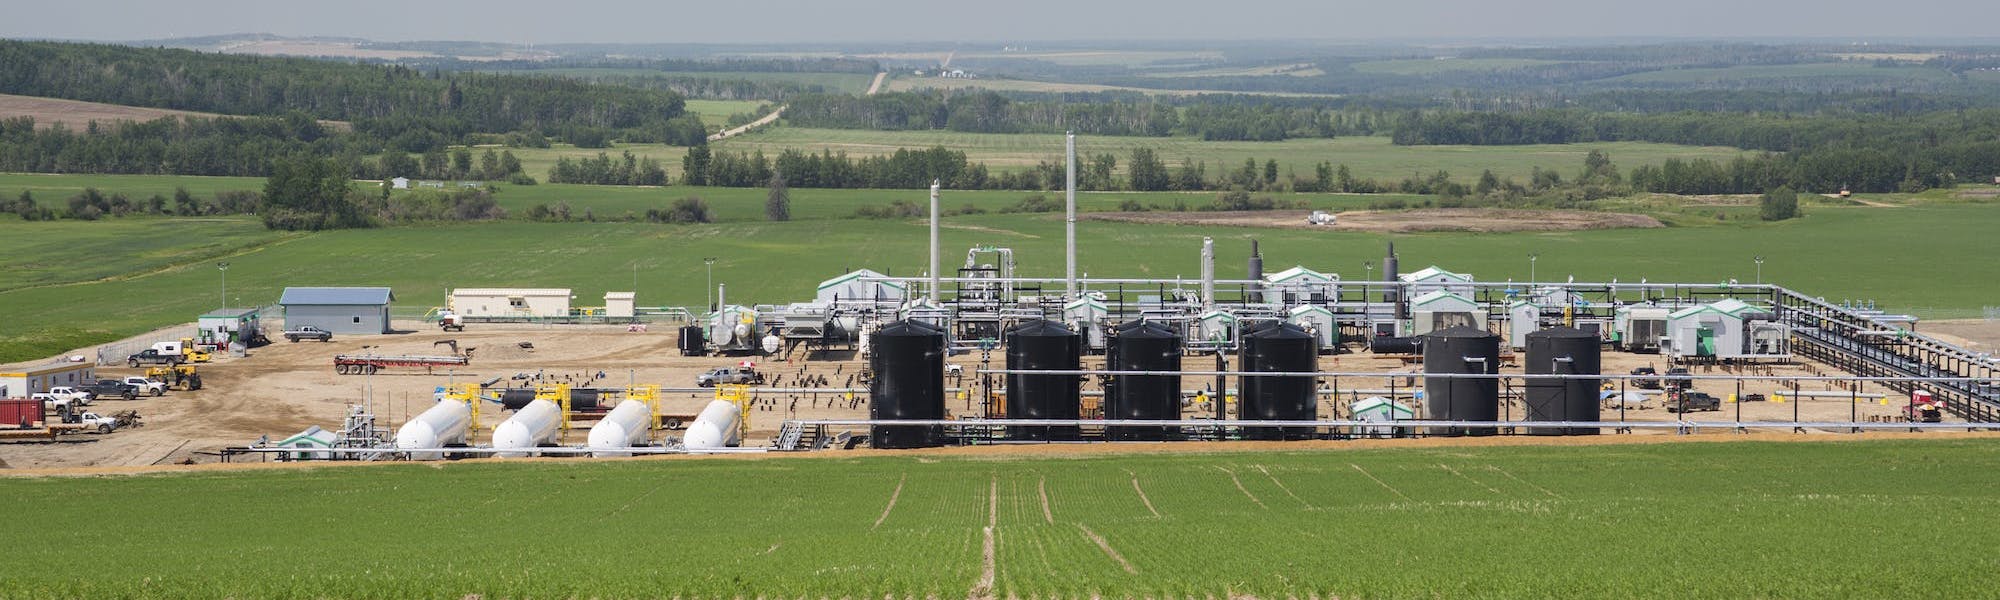 A wide view of a gas plant in a green field.